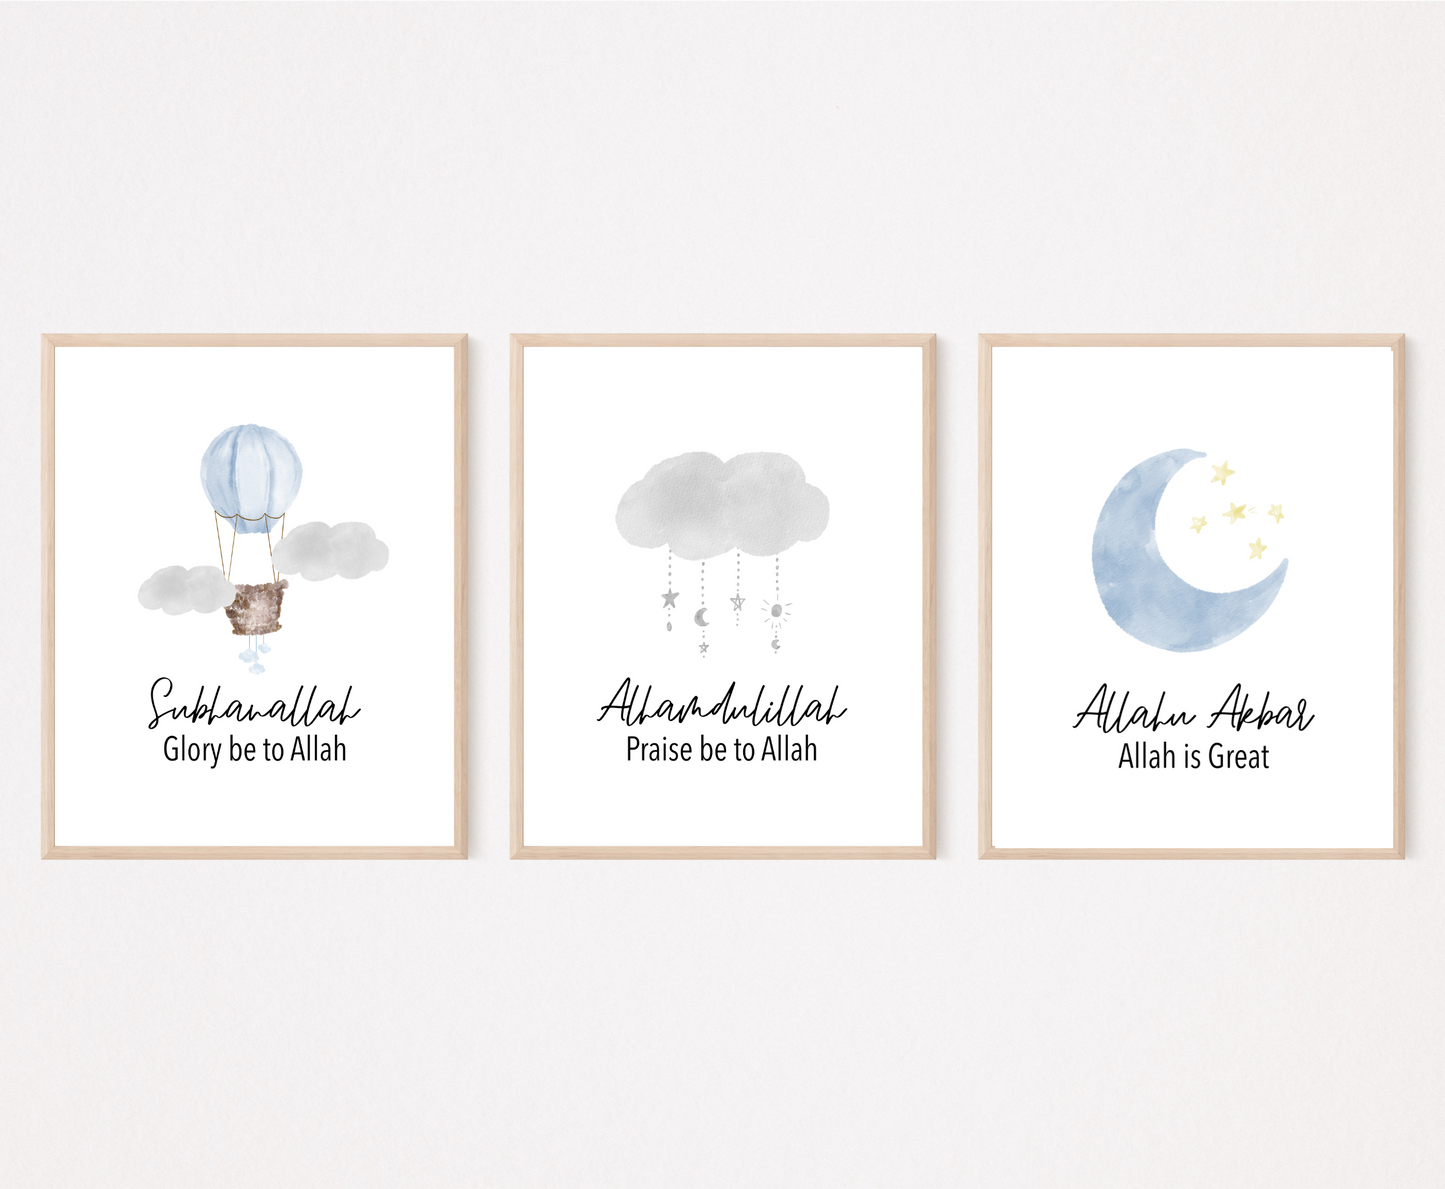 Three frames with three different graphics. The first one shows an air balloon with the word “Subhanallah”, Glory Be to Allah, written below. The middle one shows a gray cloud design with the word “Alhamdulillah”, Praise Be to Allah below. The last one shows a baby blue crescent and tiny yellow stars with the word “Allahu Akbar”, Allah is great, written below.